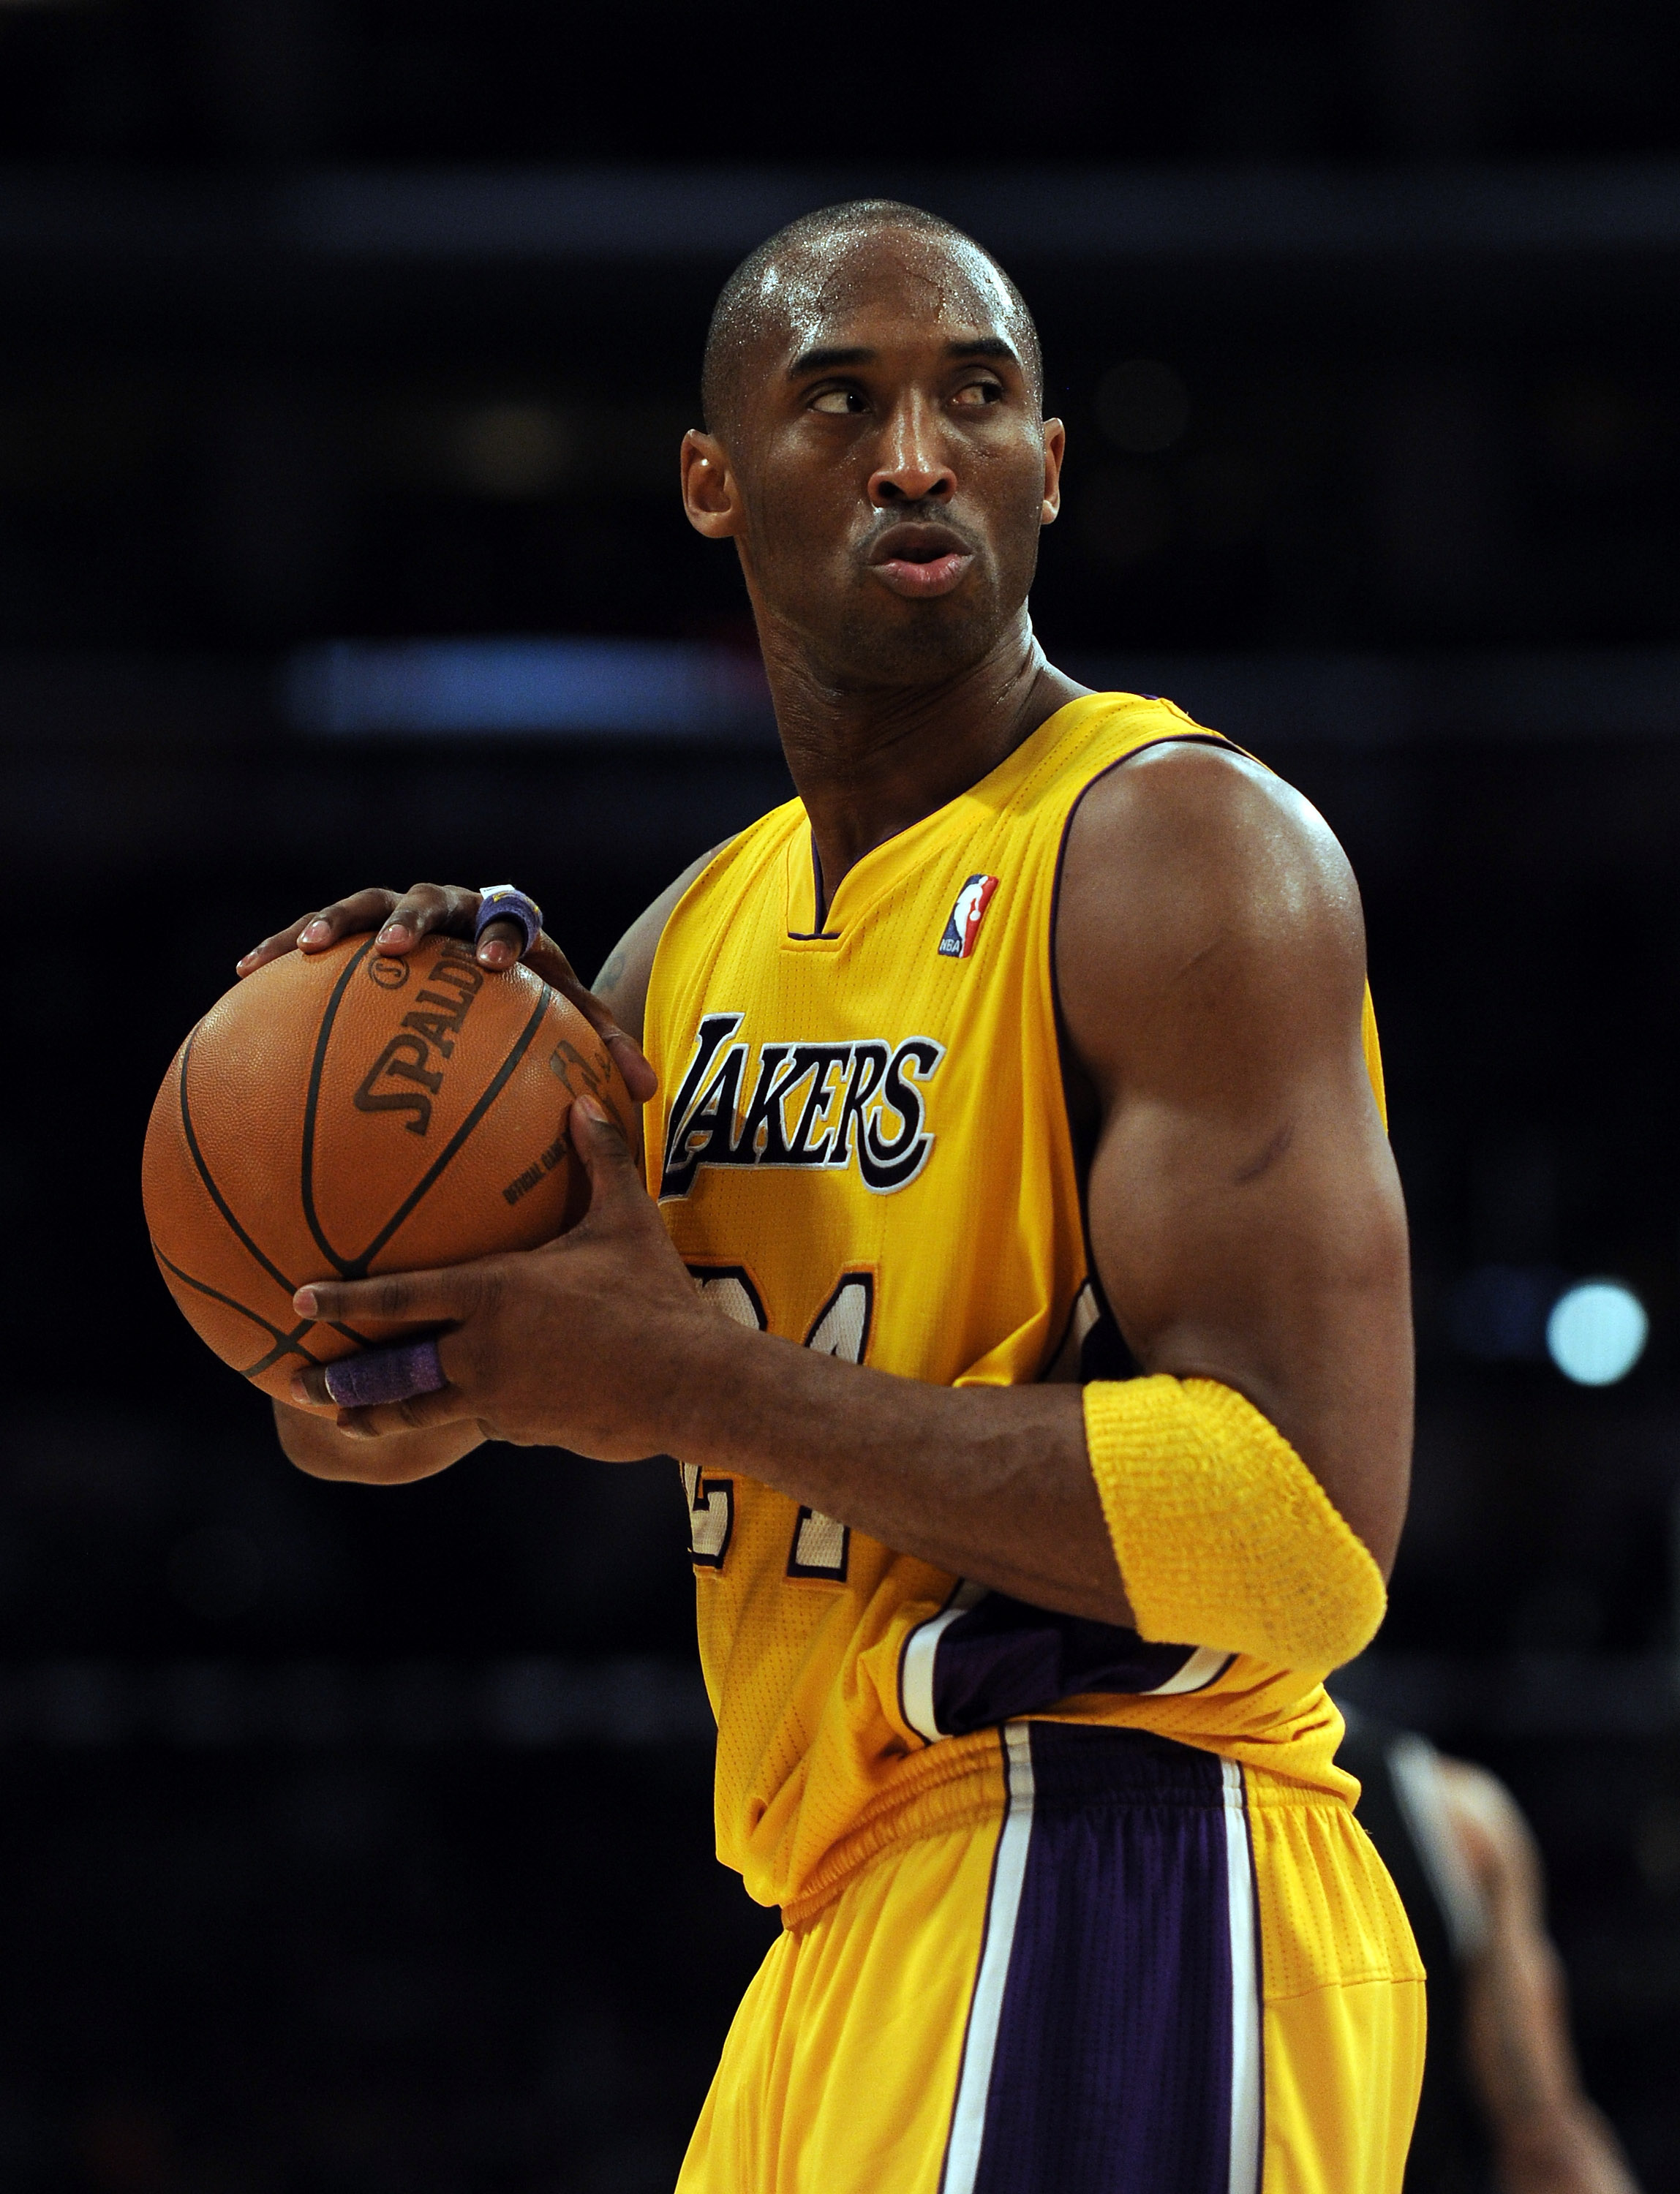 Nash is a close second — when Kobe Bryant named the best passer